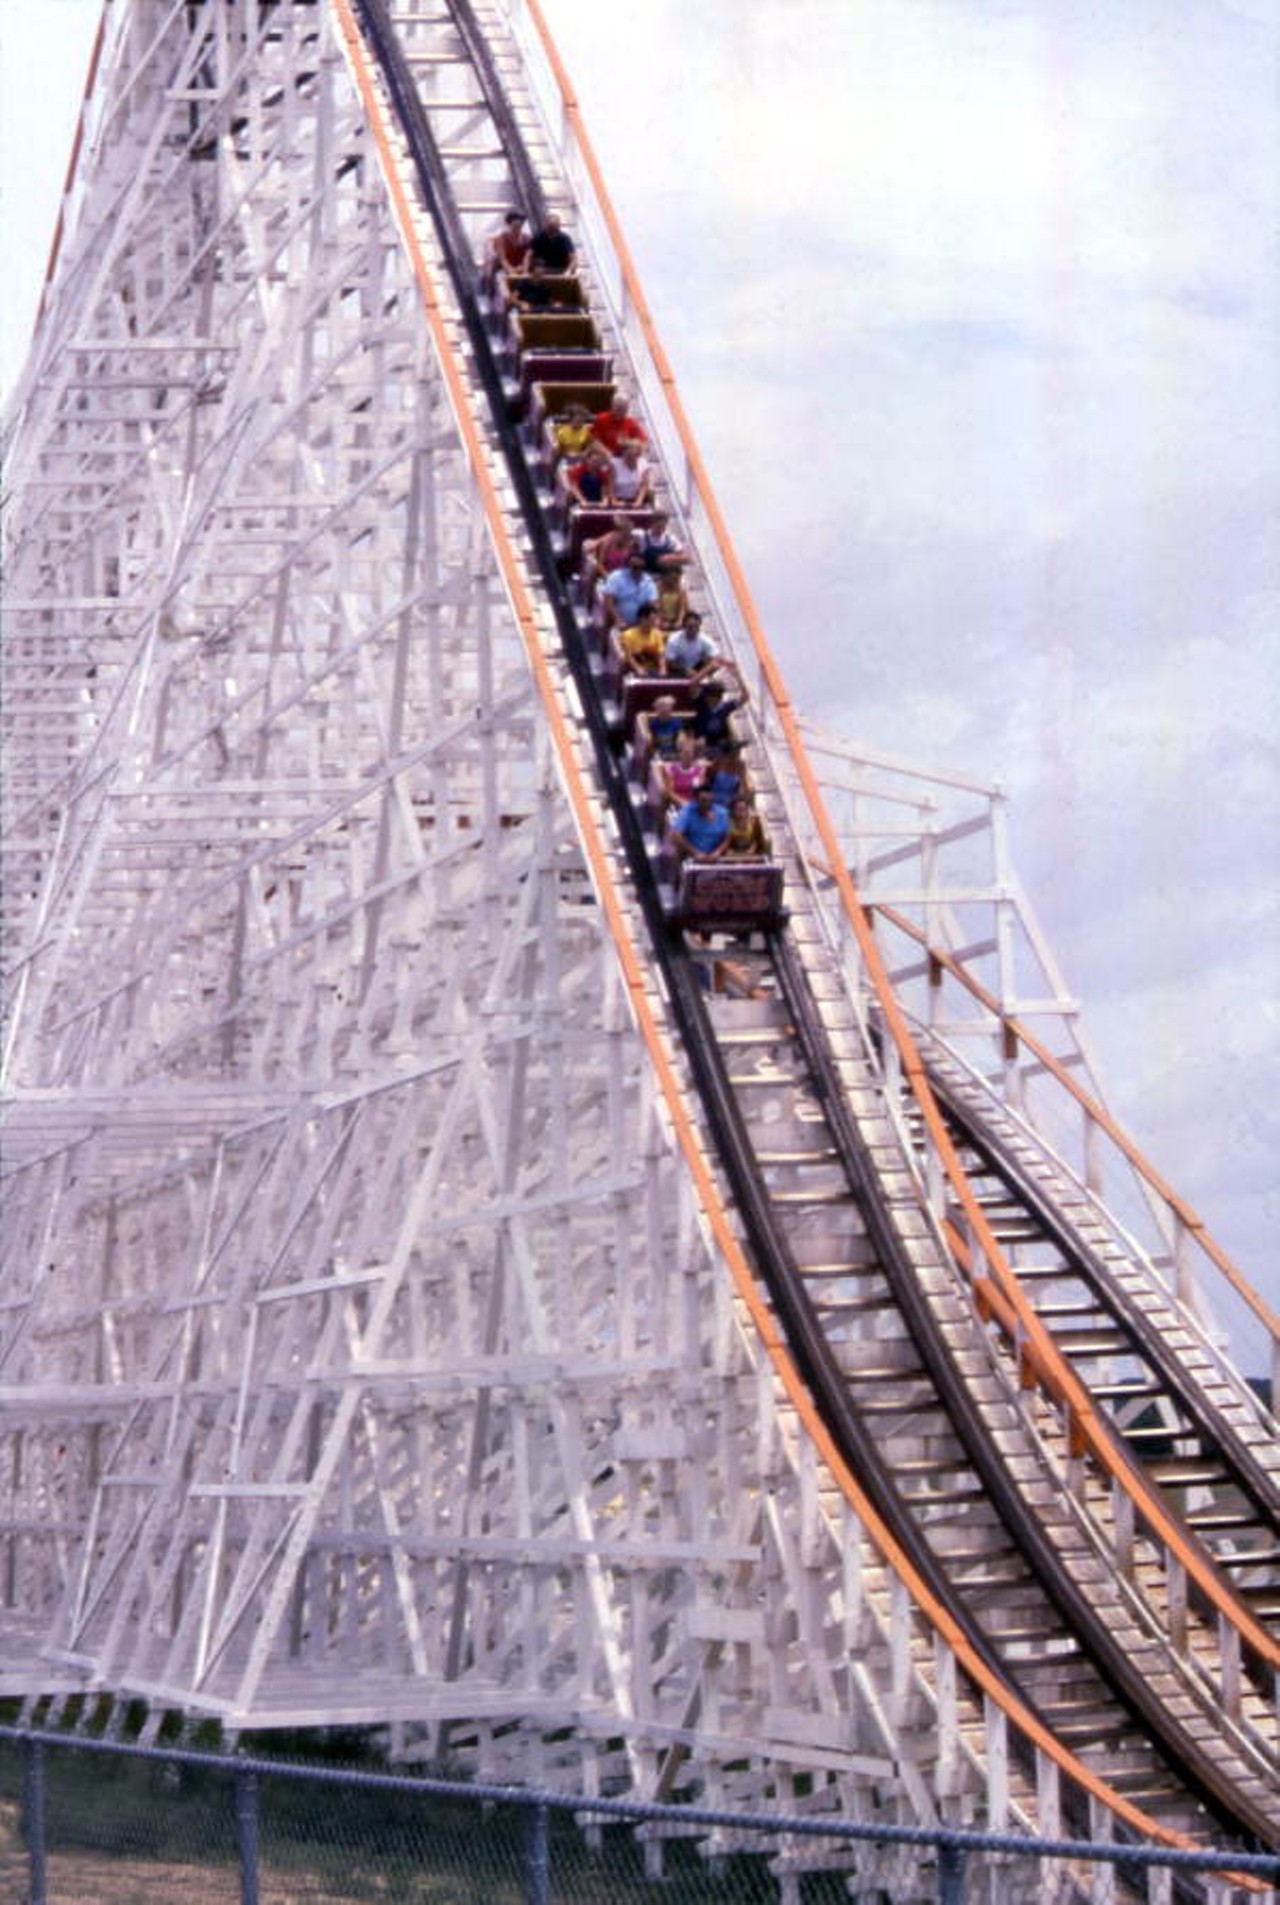 Circus World also had the best wooden roller coasters. This one was the Florida Hurricane. (via floridamemory.com)